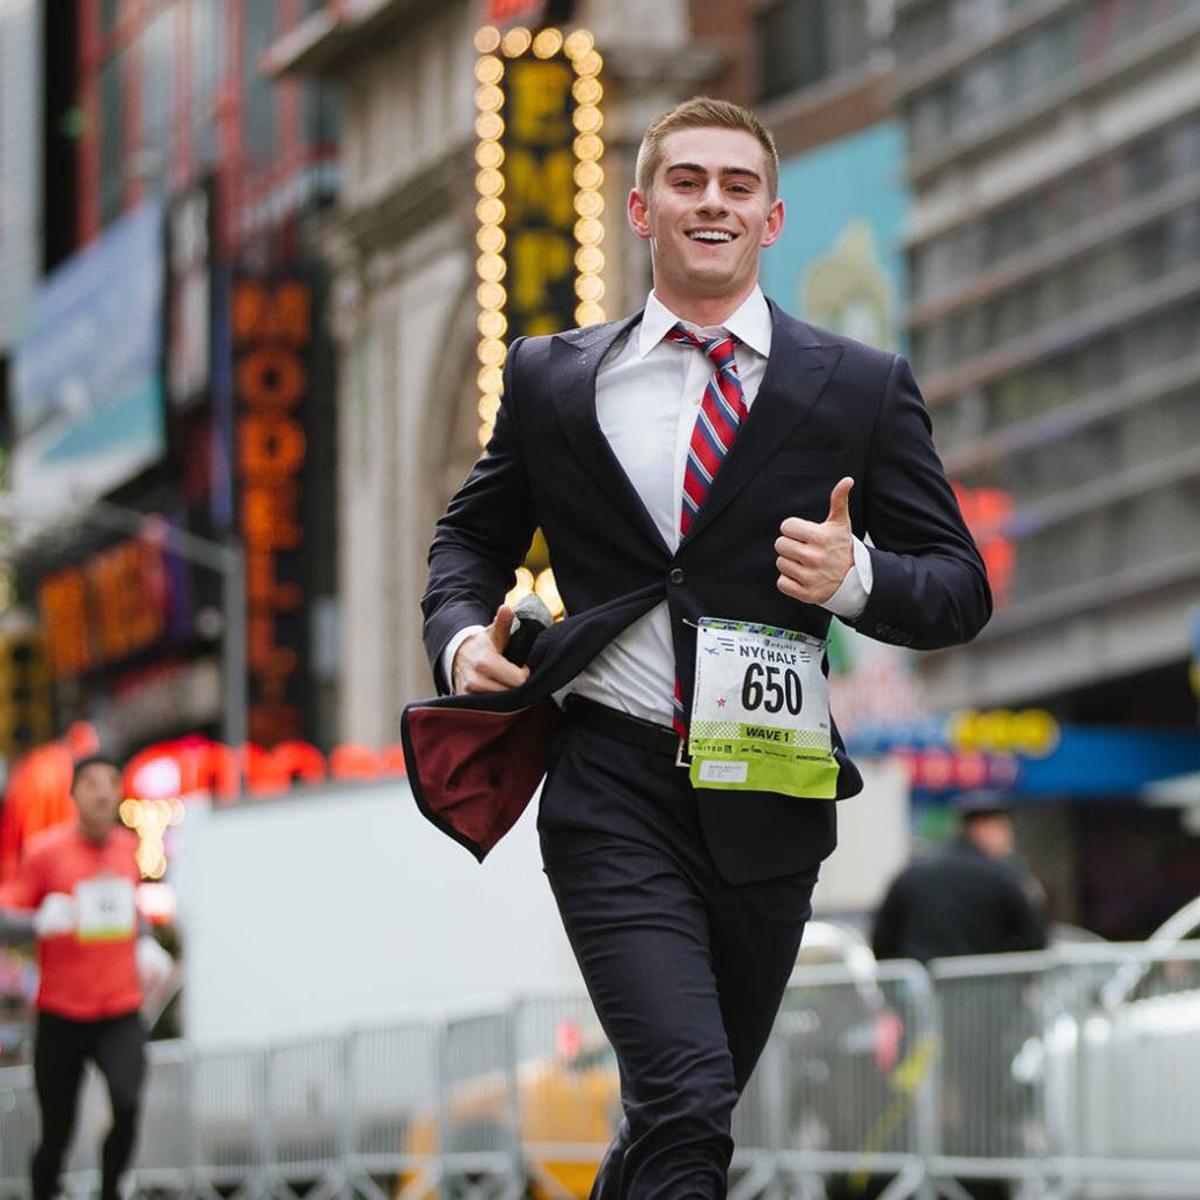 Dressed for success: Ex-Tucson runner sets record in suit ...